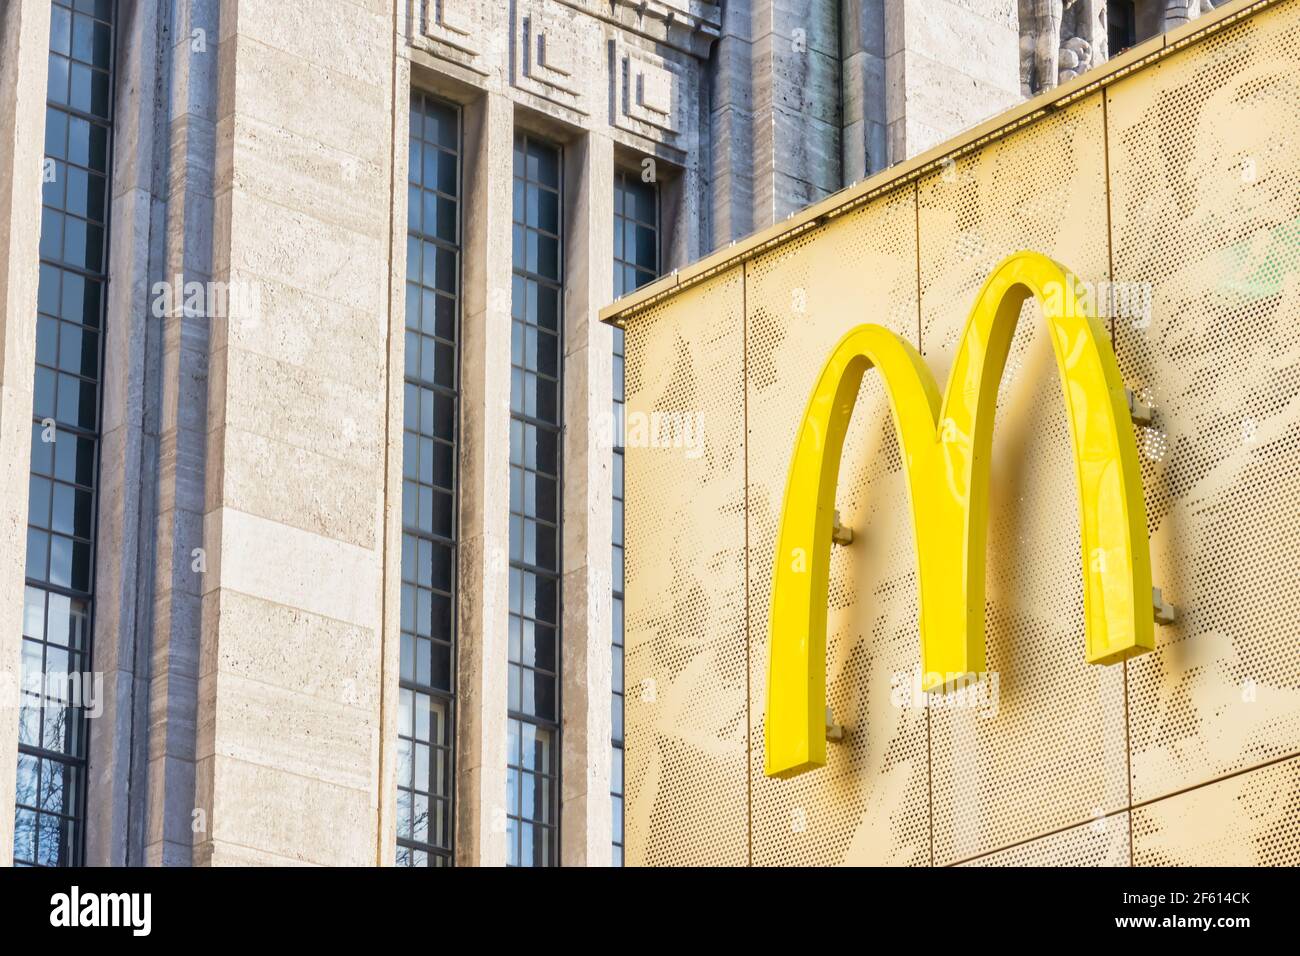 Rotterdam, The Netherlands - January 18, 2020:  Building exterior with logo of a McDonald's restaurant in Rotterdam, The Netherlands Stock Photo